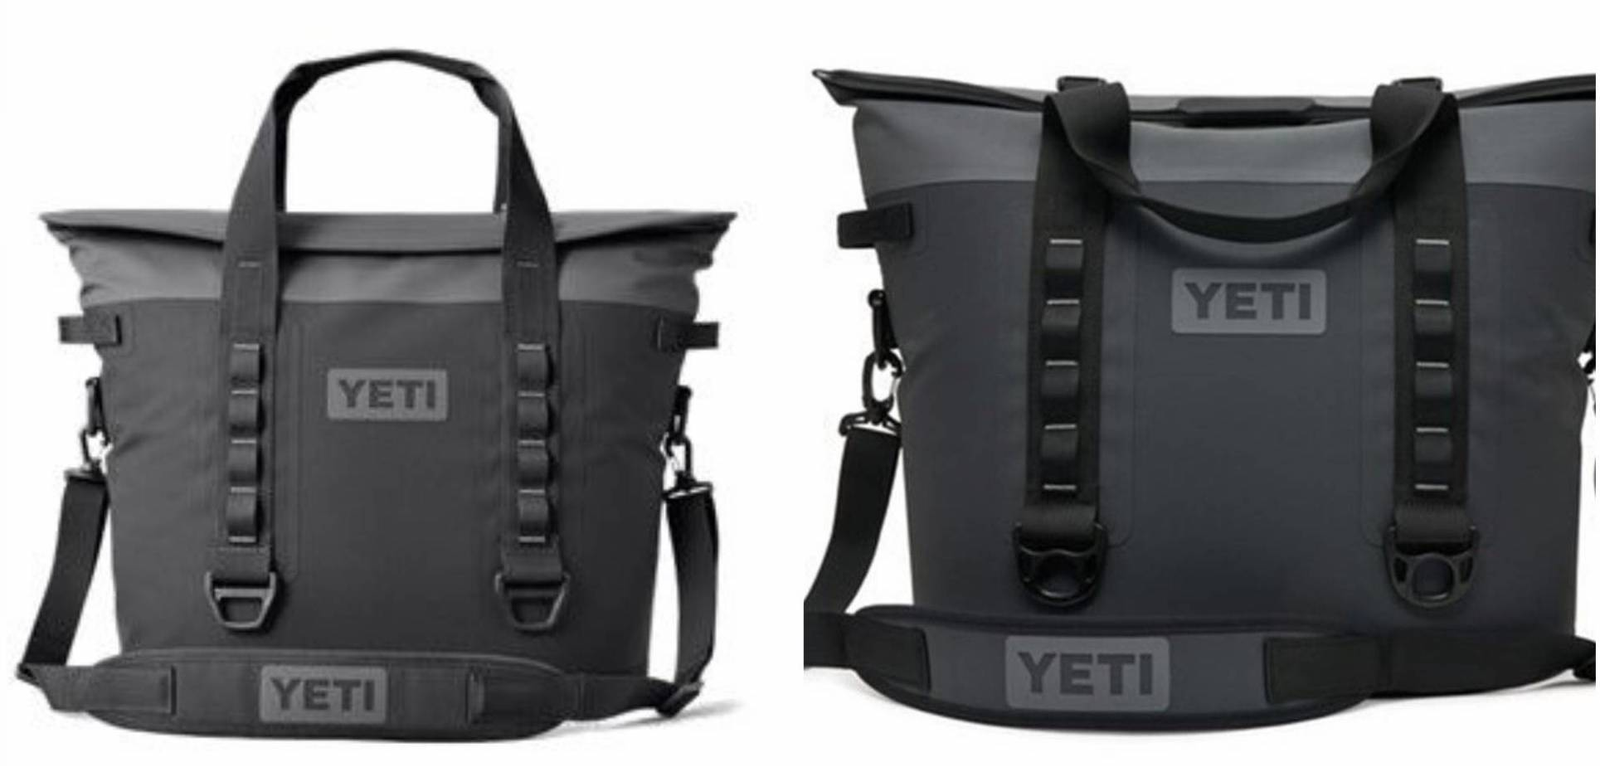 1.9M YETI SOFT COOLERS AND GEAR CASES RECALLED DUE TO HAZARDOUS MAGNET INGESTION RISK (2023)